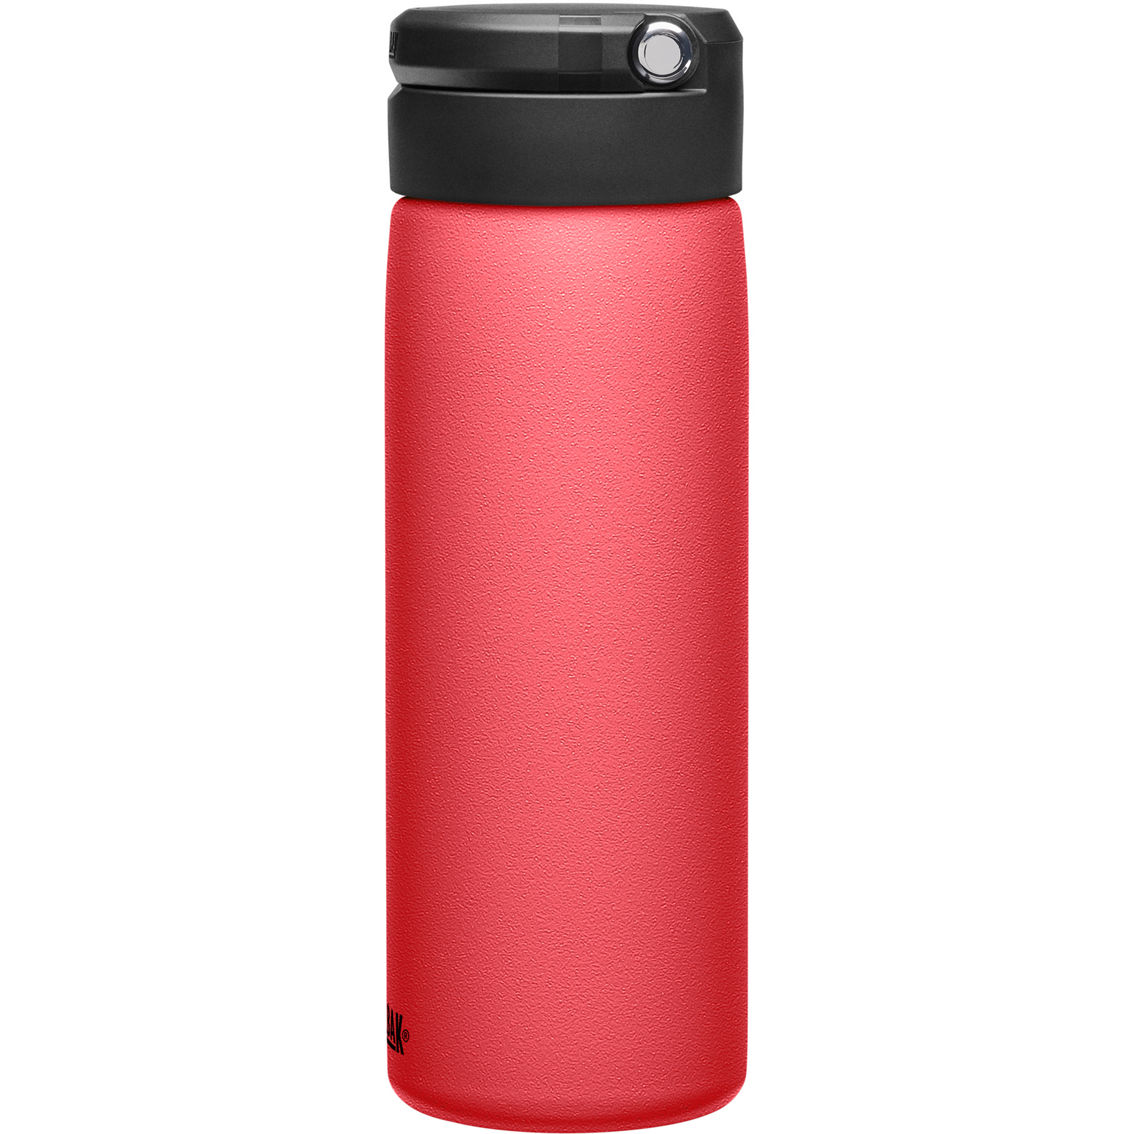 Camelbak Fit Cap Insulated Stainless Steel 20 oz. Water Bottle - Image 8 of 8